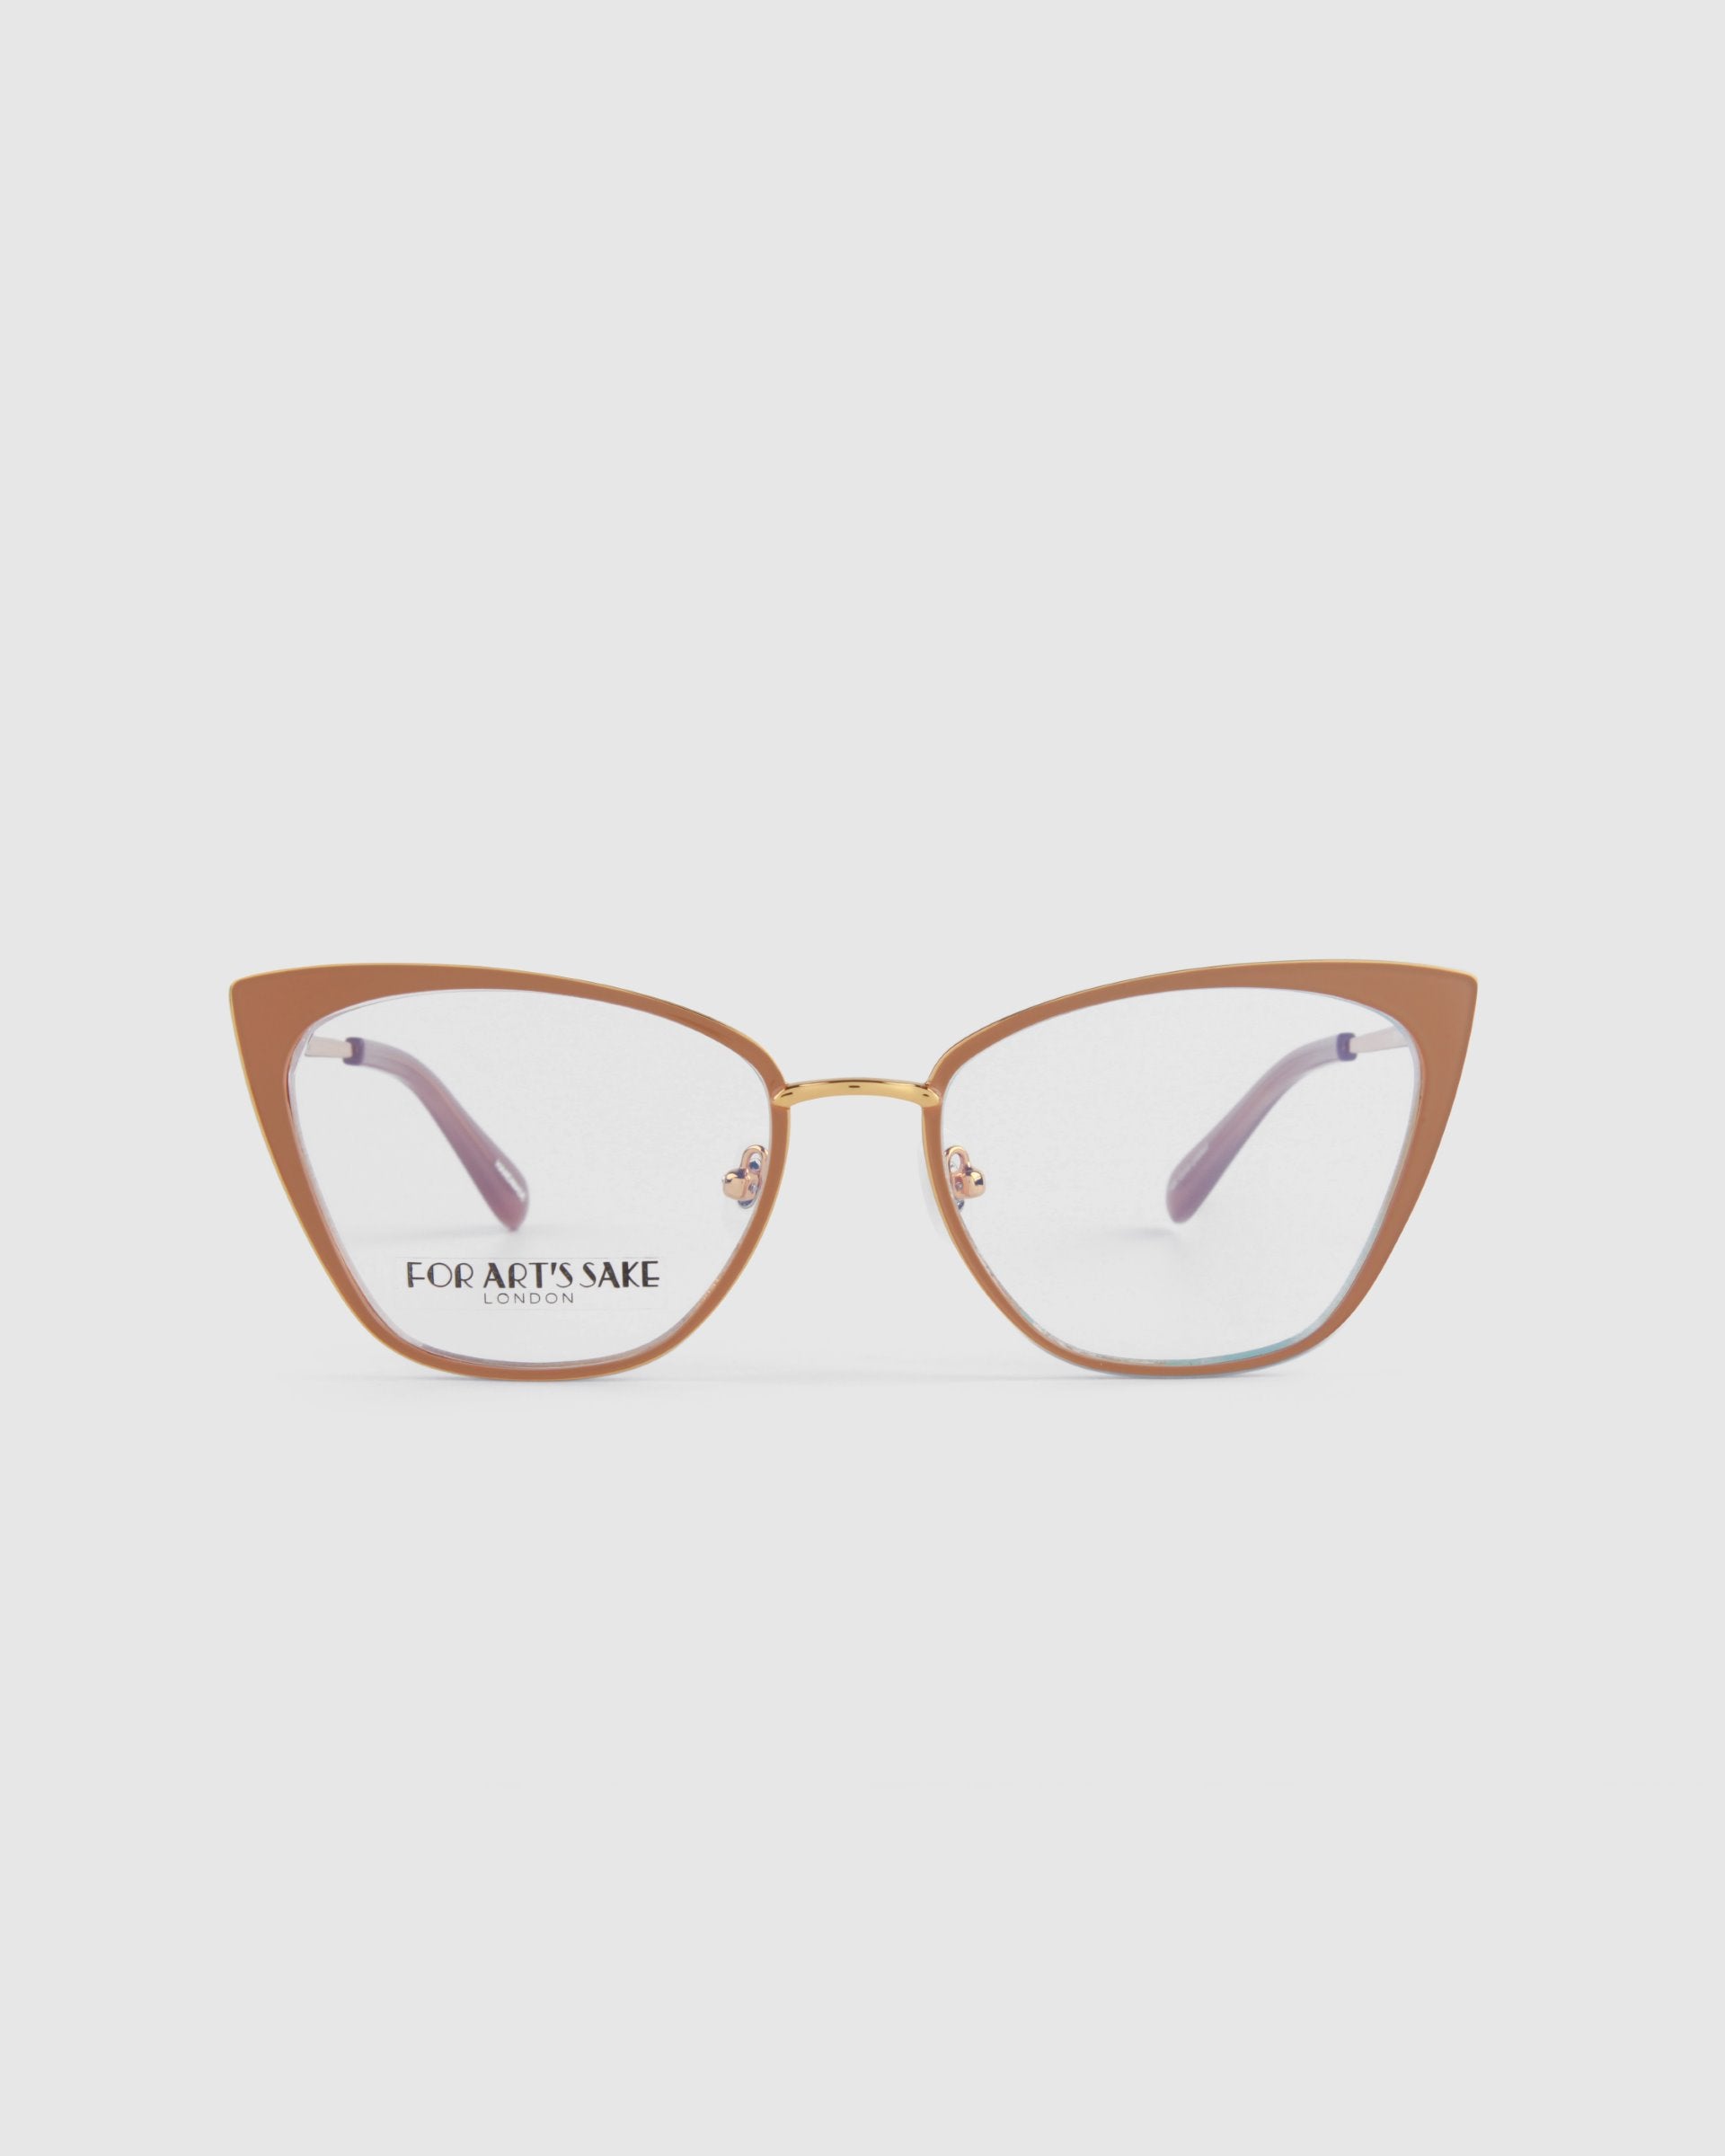 A pair of stylish eyeglasses with cat-eye frames. The frames are primarily brown with thin, 14kt gold plated detailing around the lenses. The temples have a matching purple color. The left lens features the product name "Stella Two" and the brand name "For Art's Sake®" in black text.